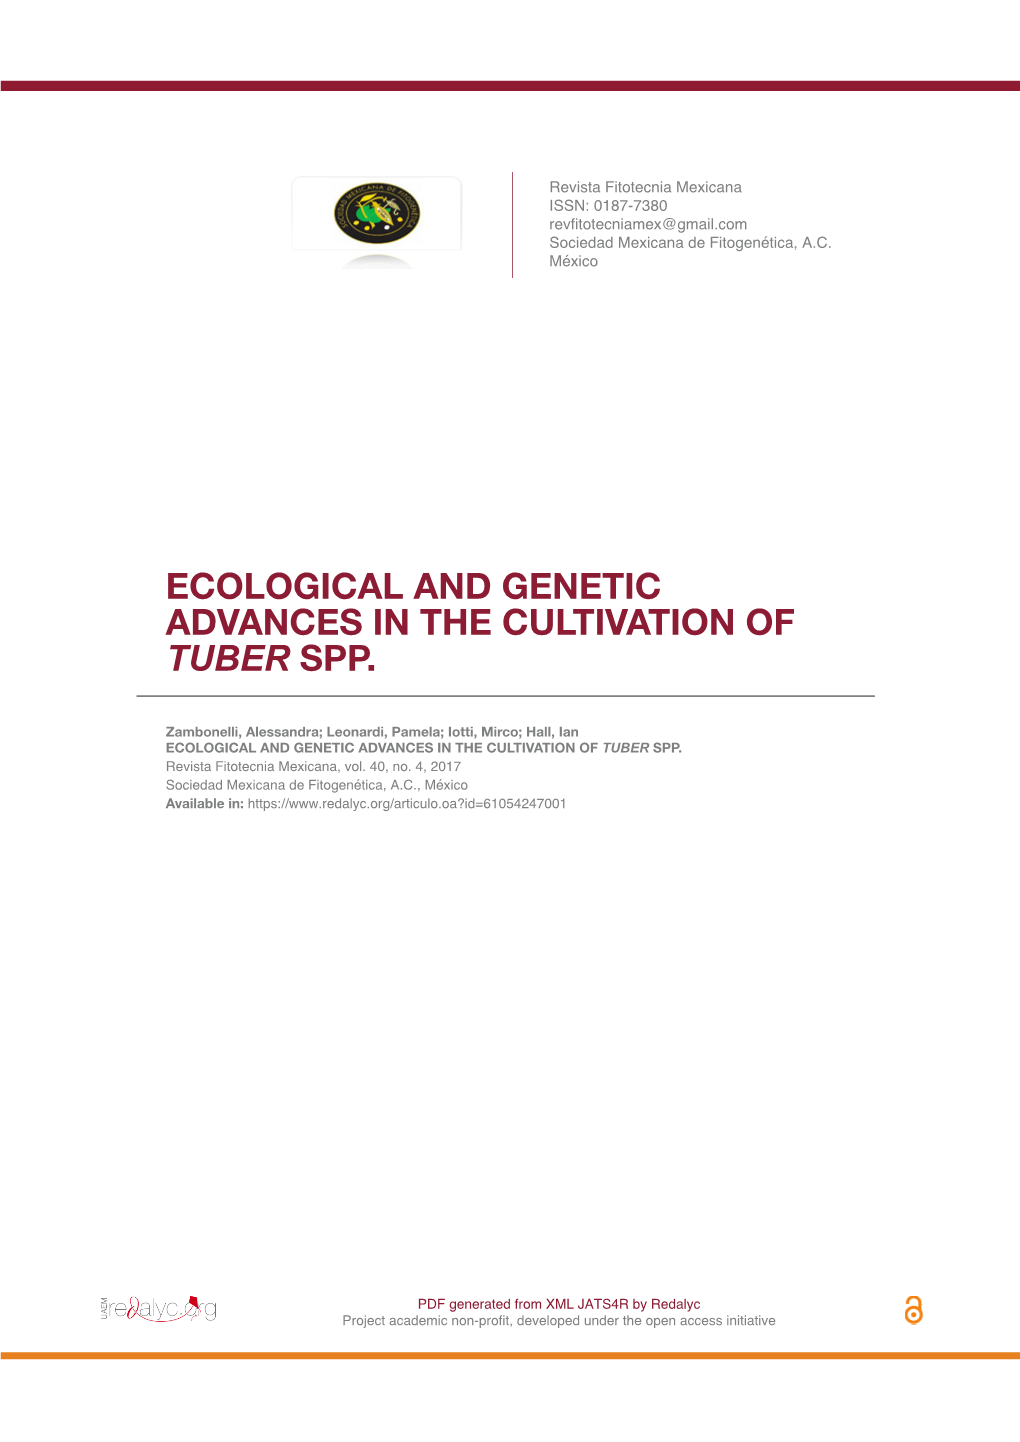 Ecological and Genetic Advances in the Cultivation of Tuber Spp